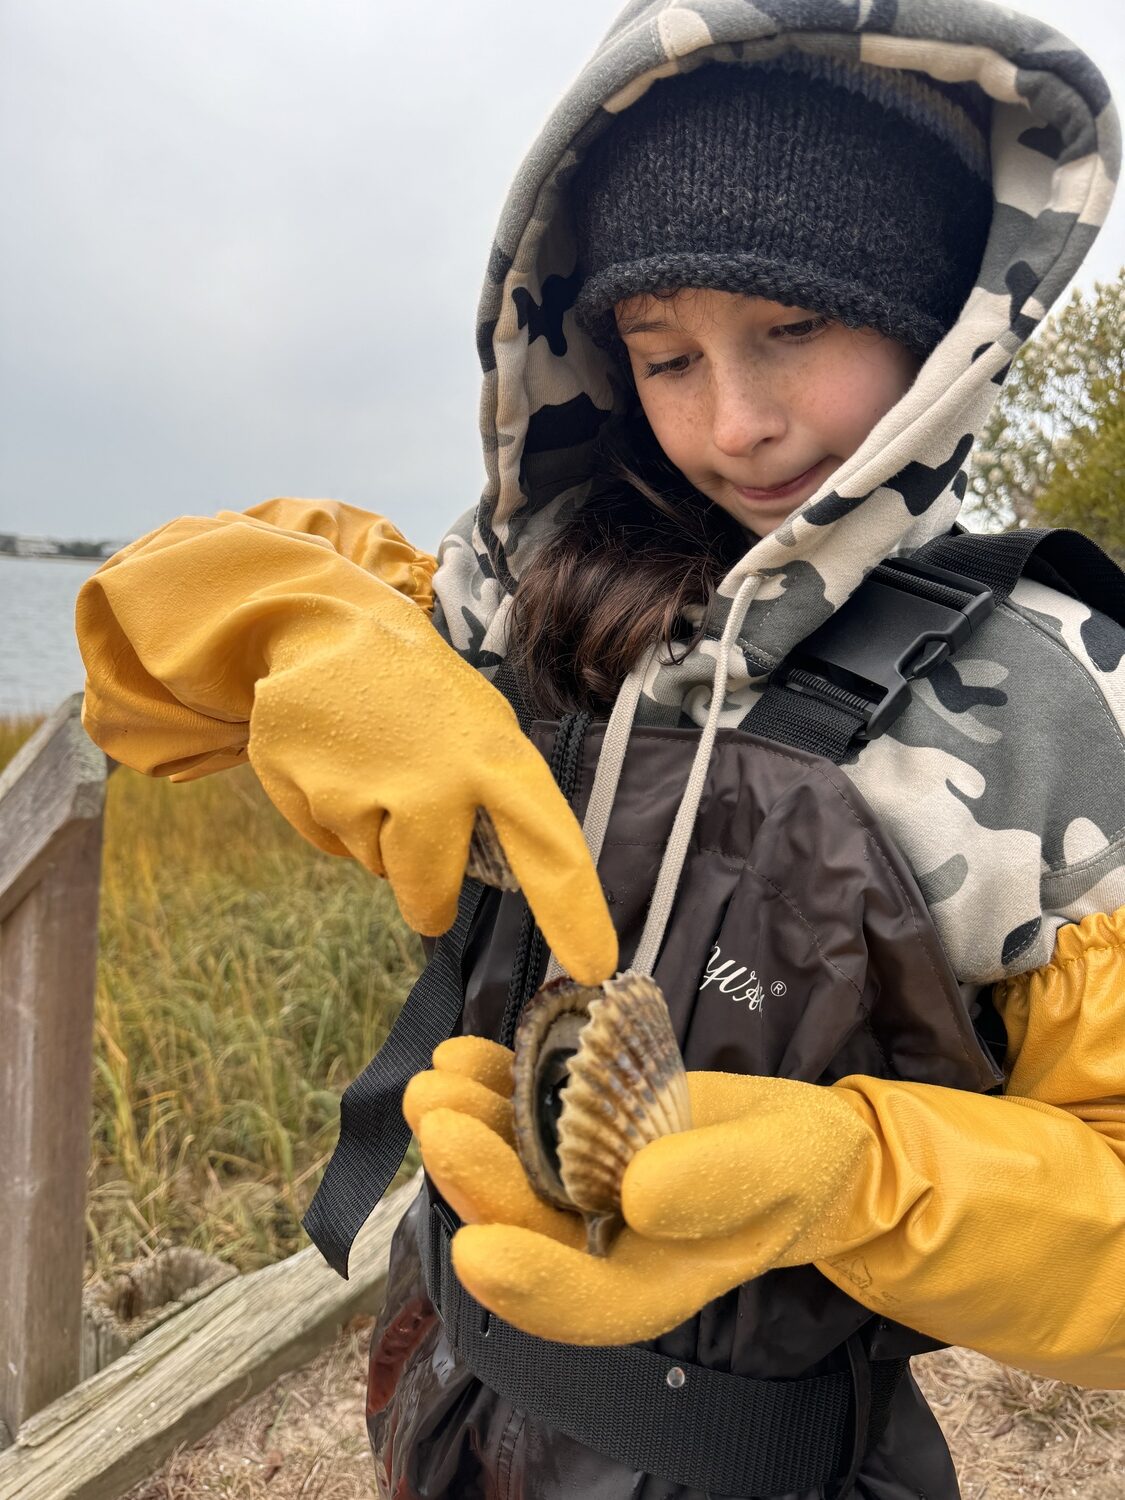 Juliette LaFemina examines one of the Peconic bay scallops she caught on Tuesday. 
MICHAEL WRIGHT